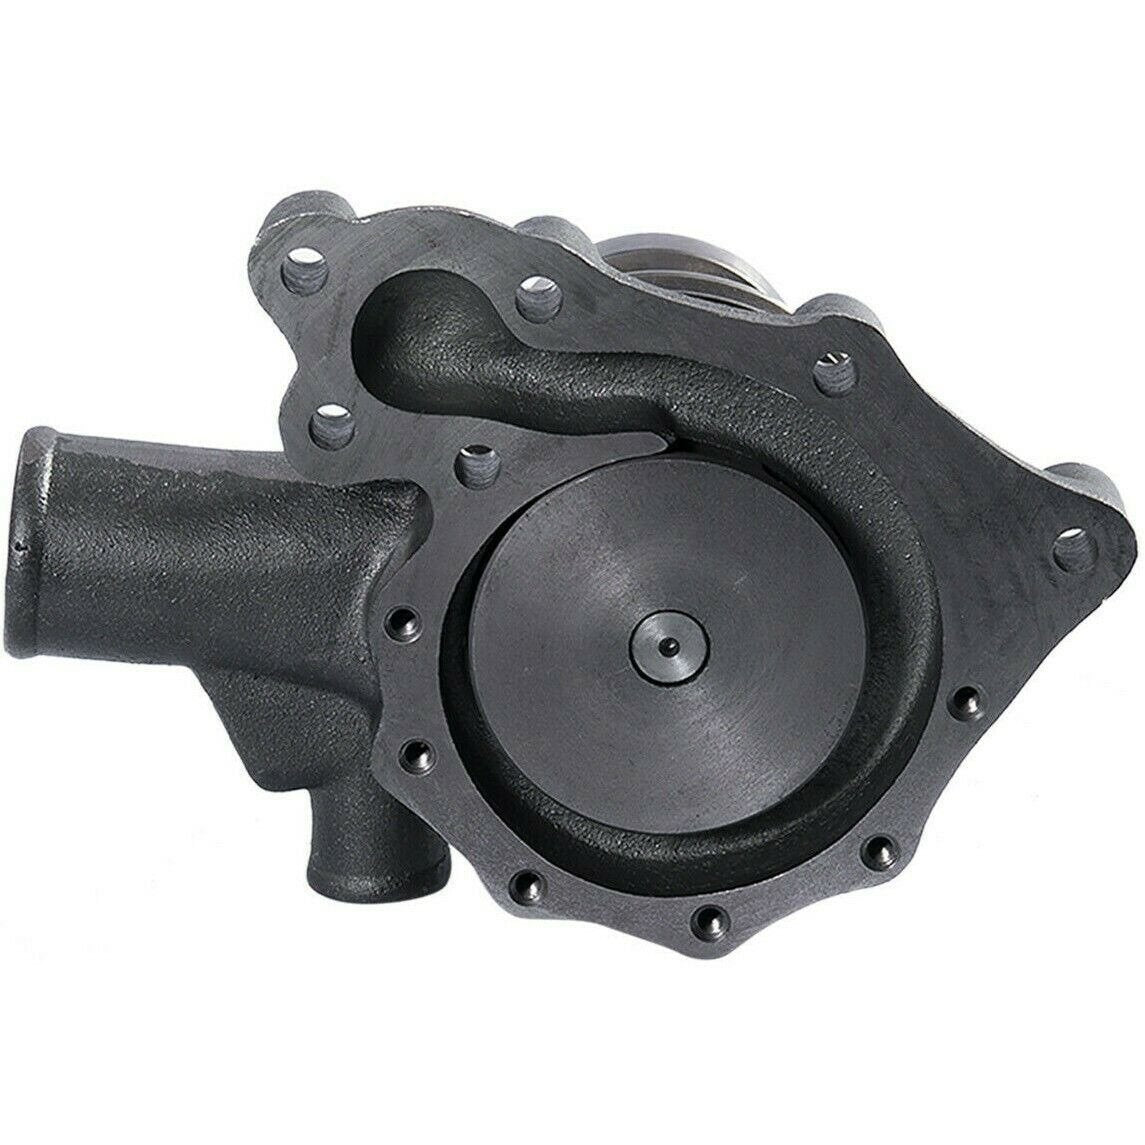 Water Pump Replacement For FORD 1910 COMPACT TRACTOR SBA145016540 SBA145016211